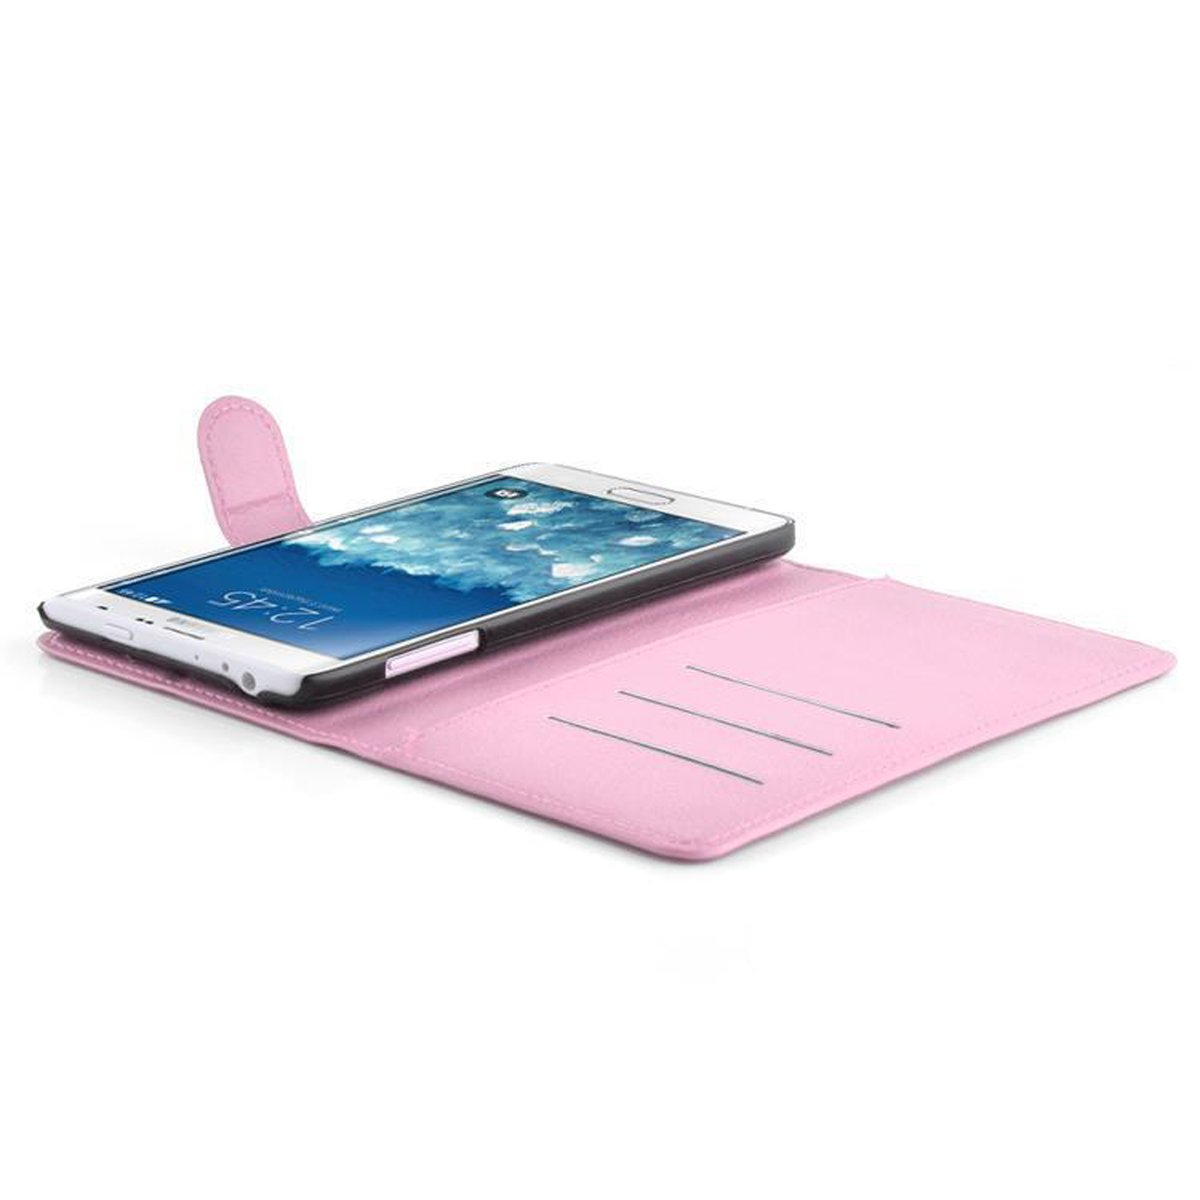 Standfunktion, LOTUS NOTE ROSA Book Samsung, EDGE, Galaxy Bookcover, Hülle CADORABO